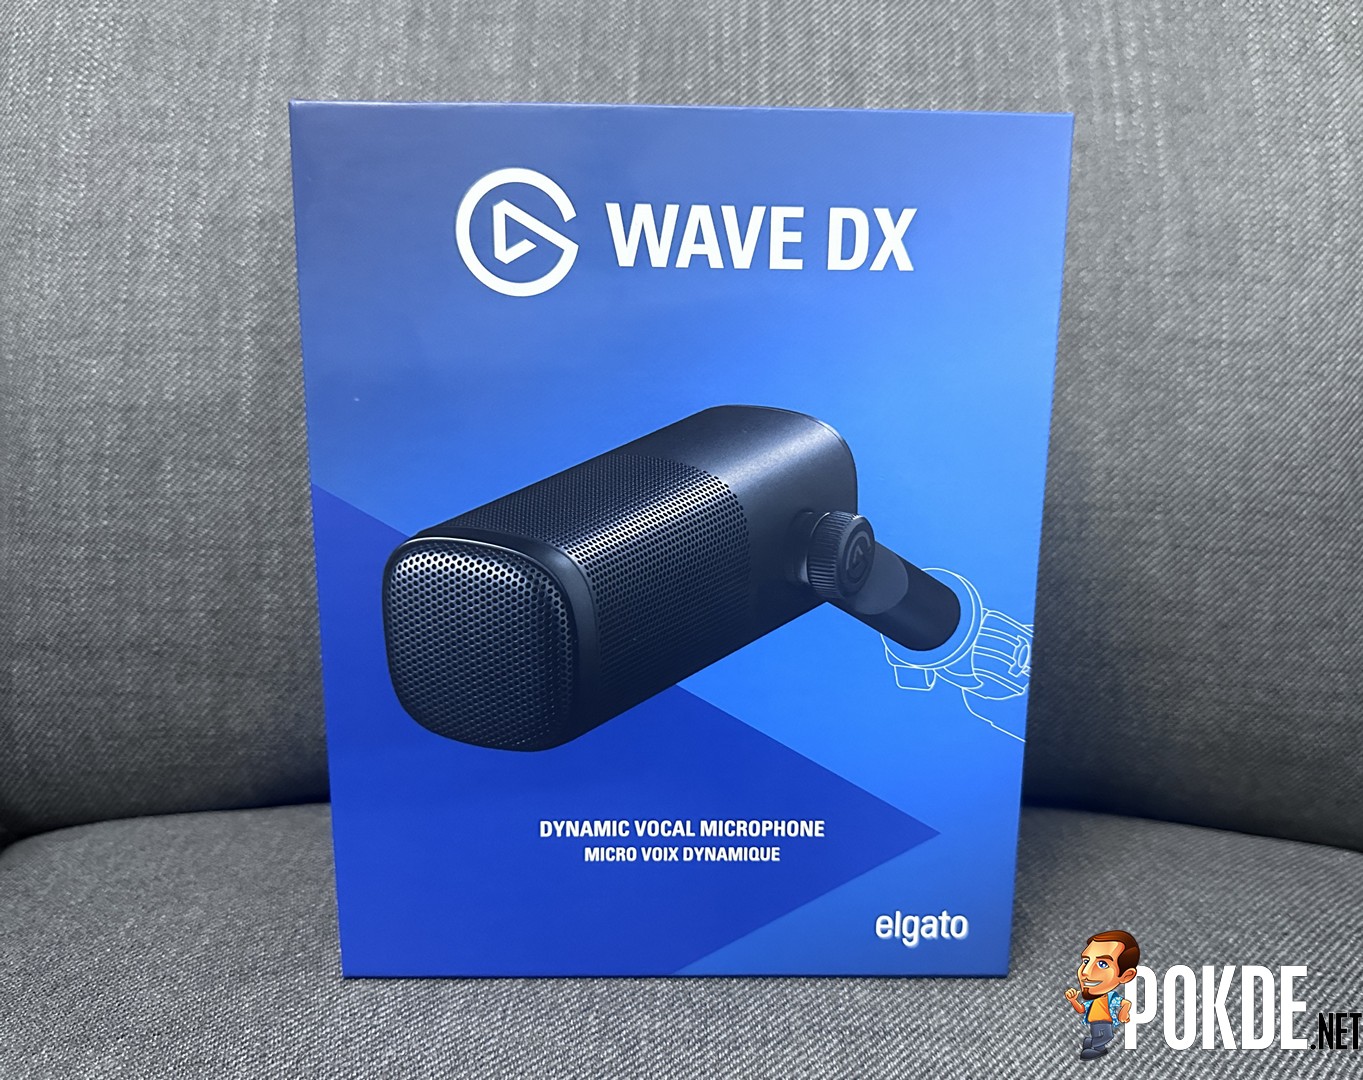 Elgato Wave DX vs Elgato Wave 3, Which One Should You Buy? 